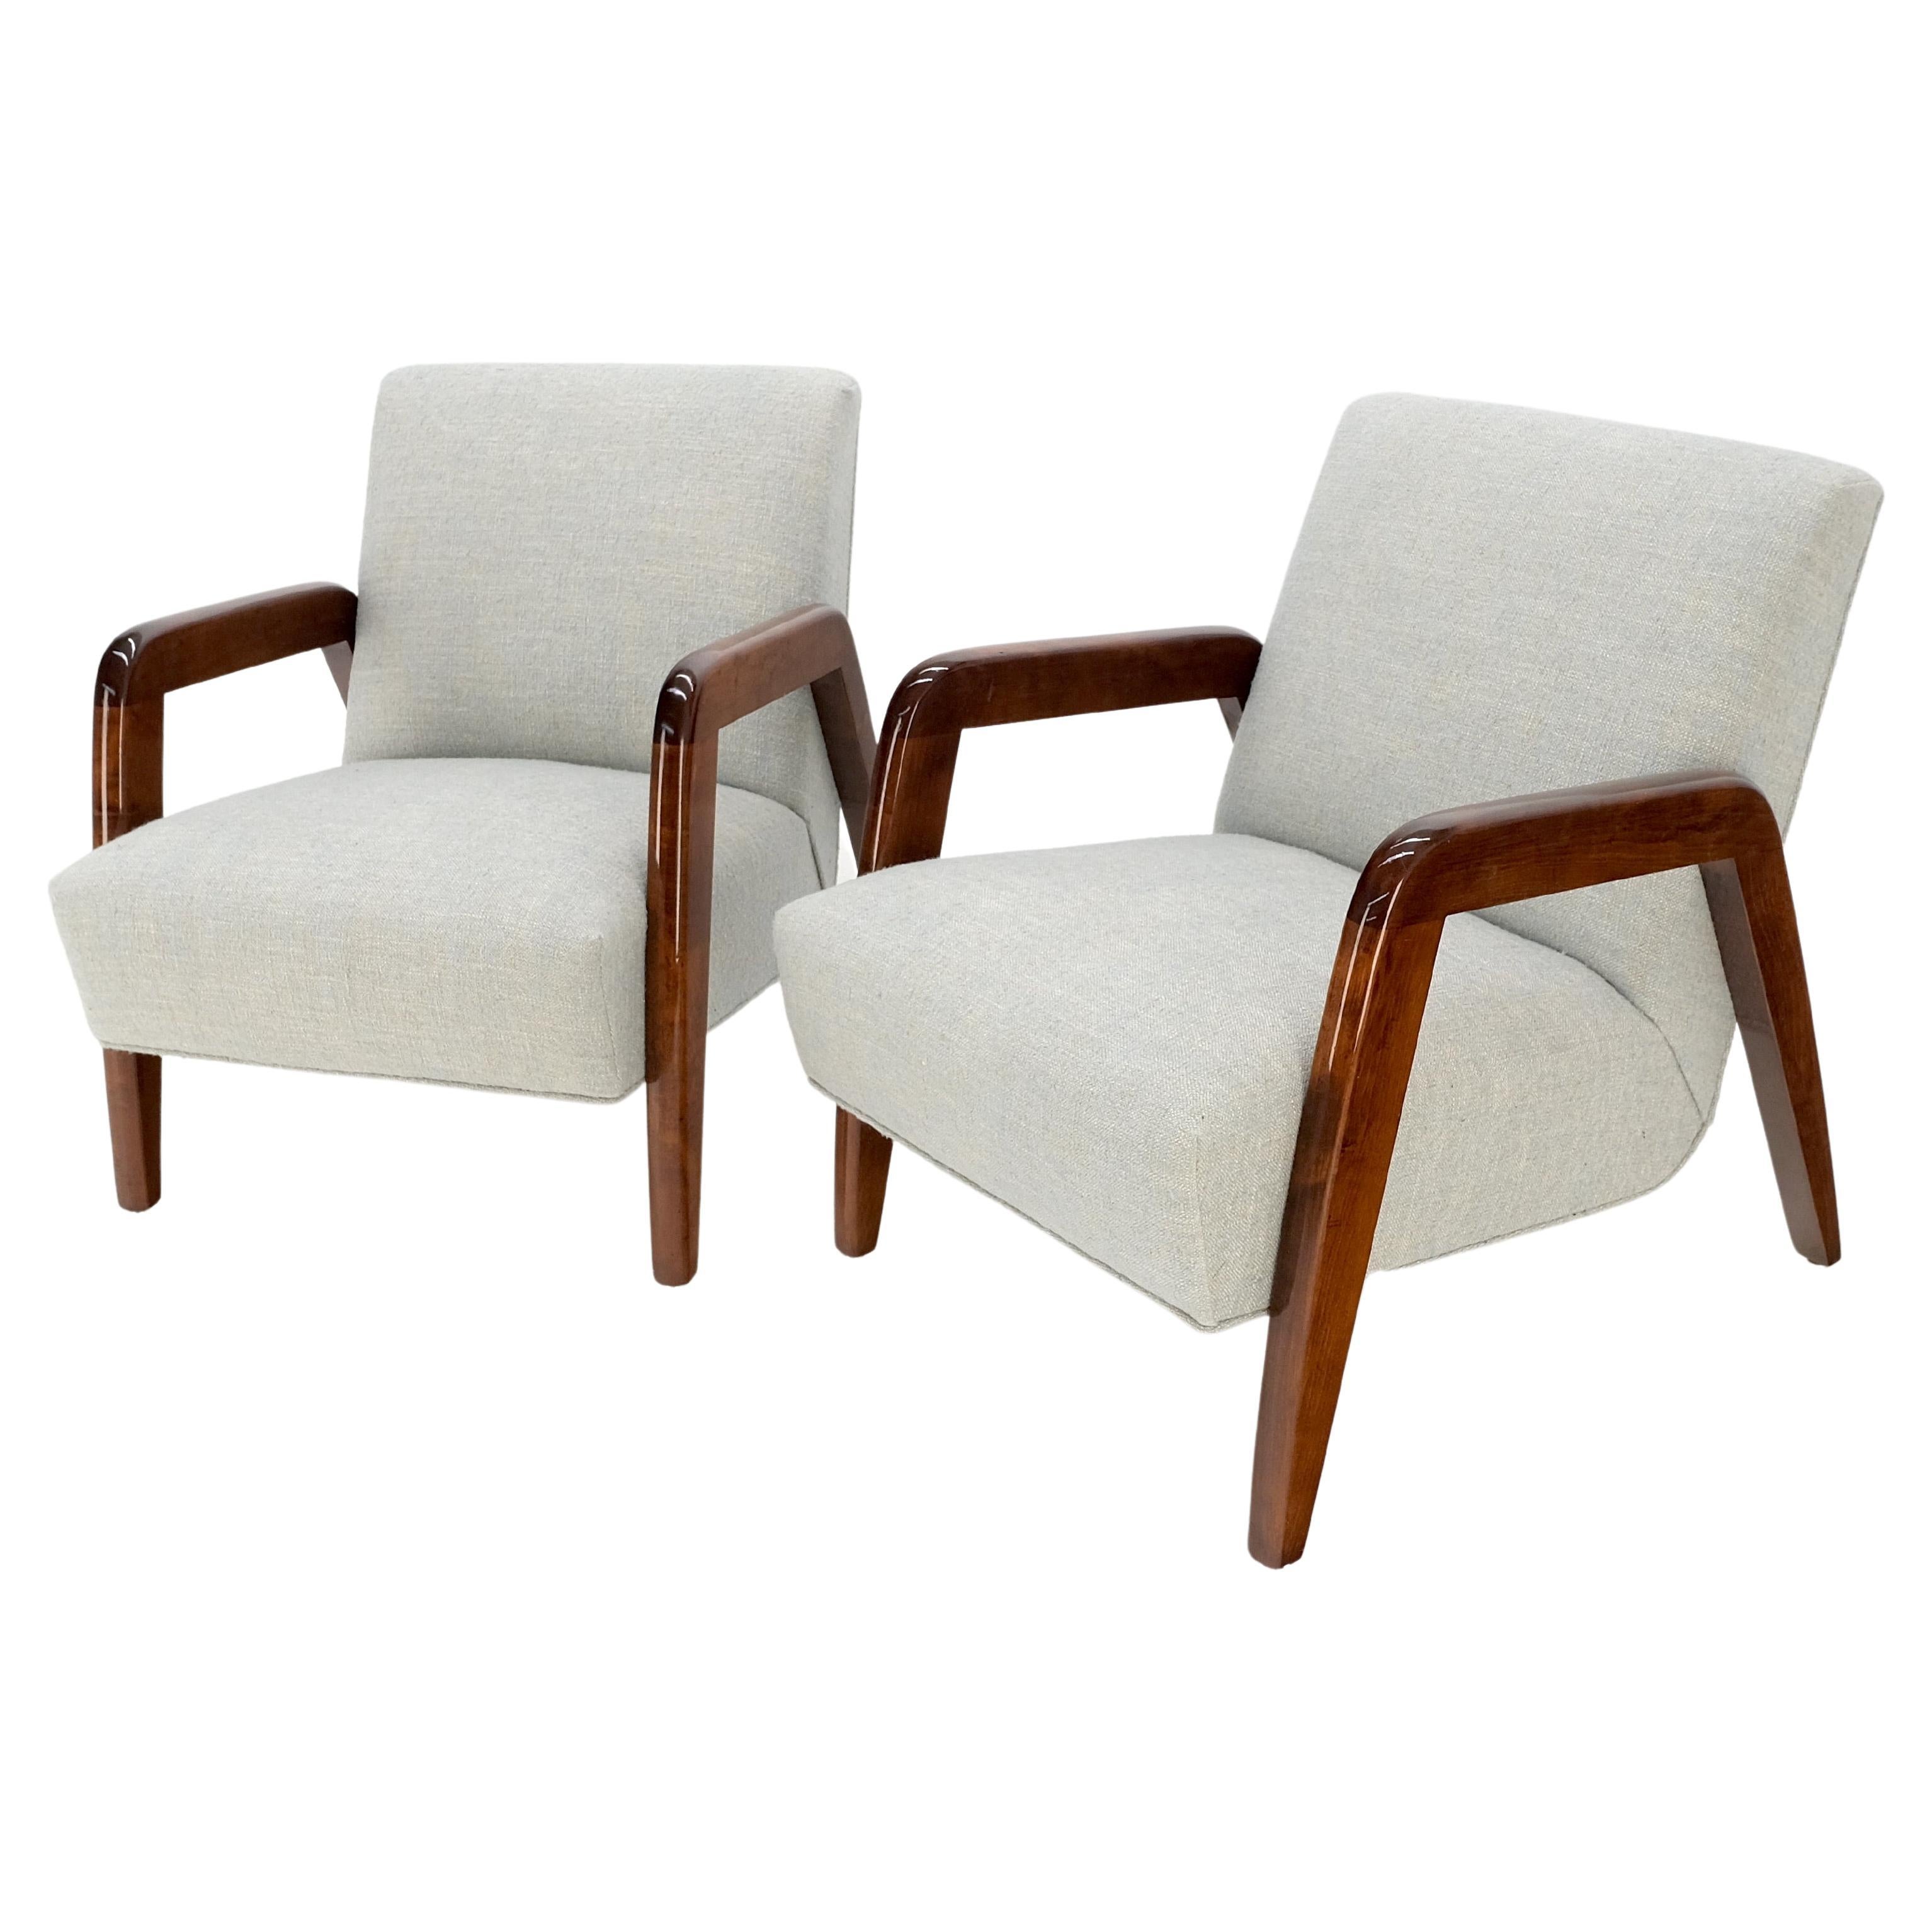 Pair New Leinen Polsterung Heavy Solid Maple Frames American  Lounge Chairs MINT! im Angebot